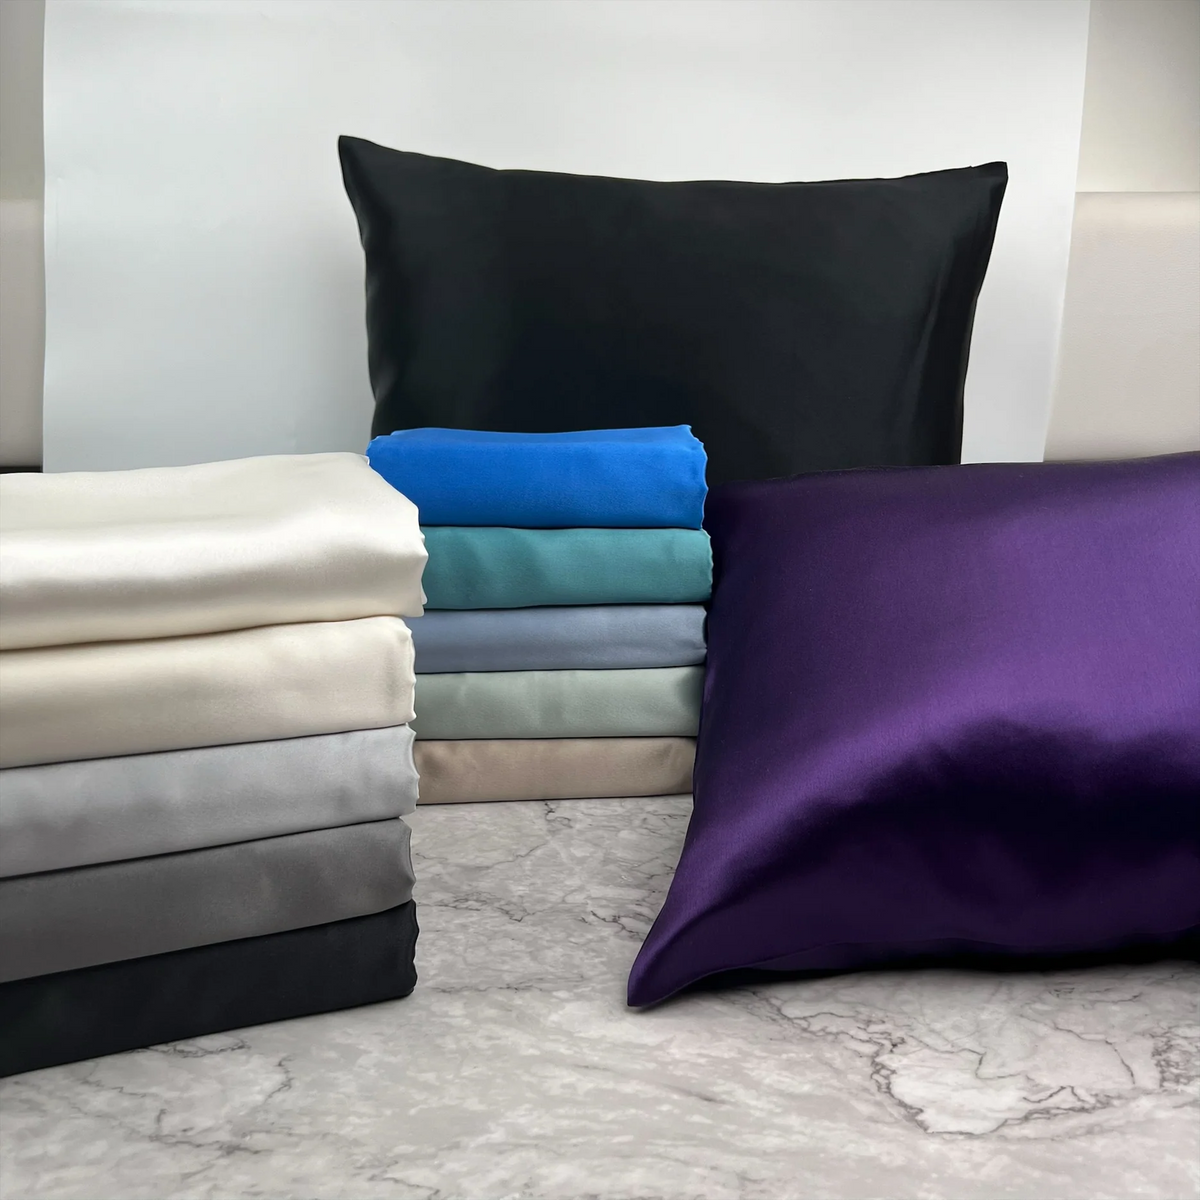 Stack Image of Mulberry Park Silks Deluxe 22 Momme Pure Silk Pillowcase in Different Colors